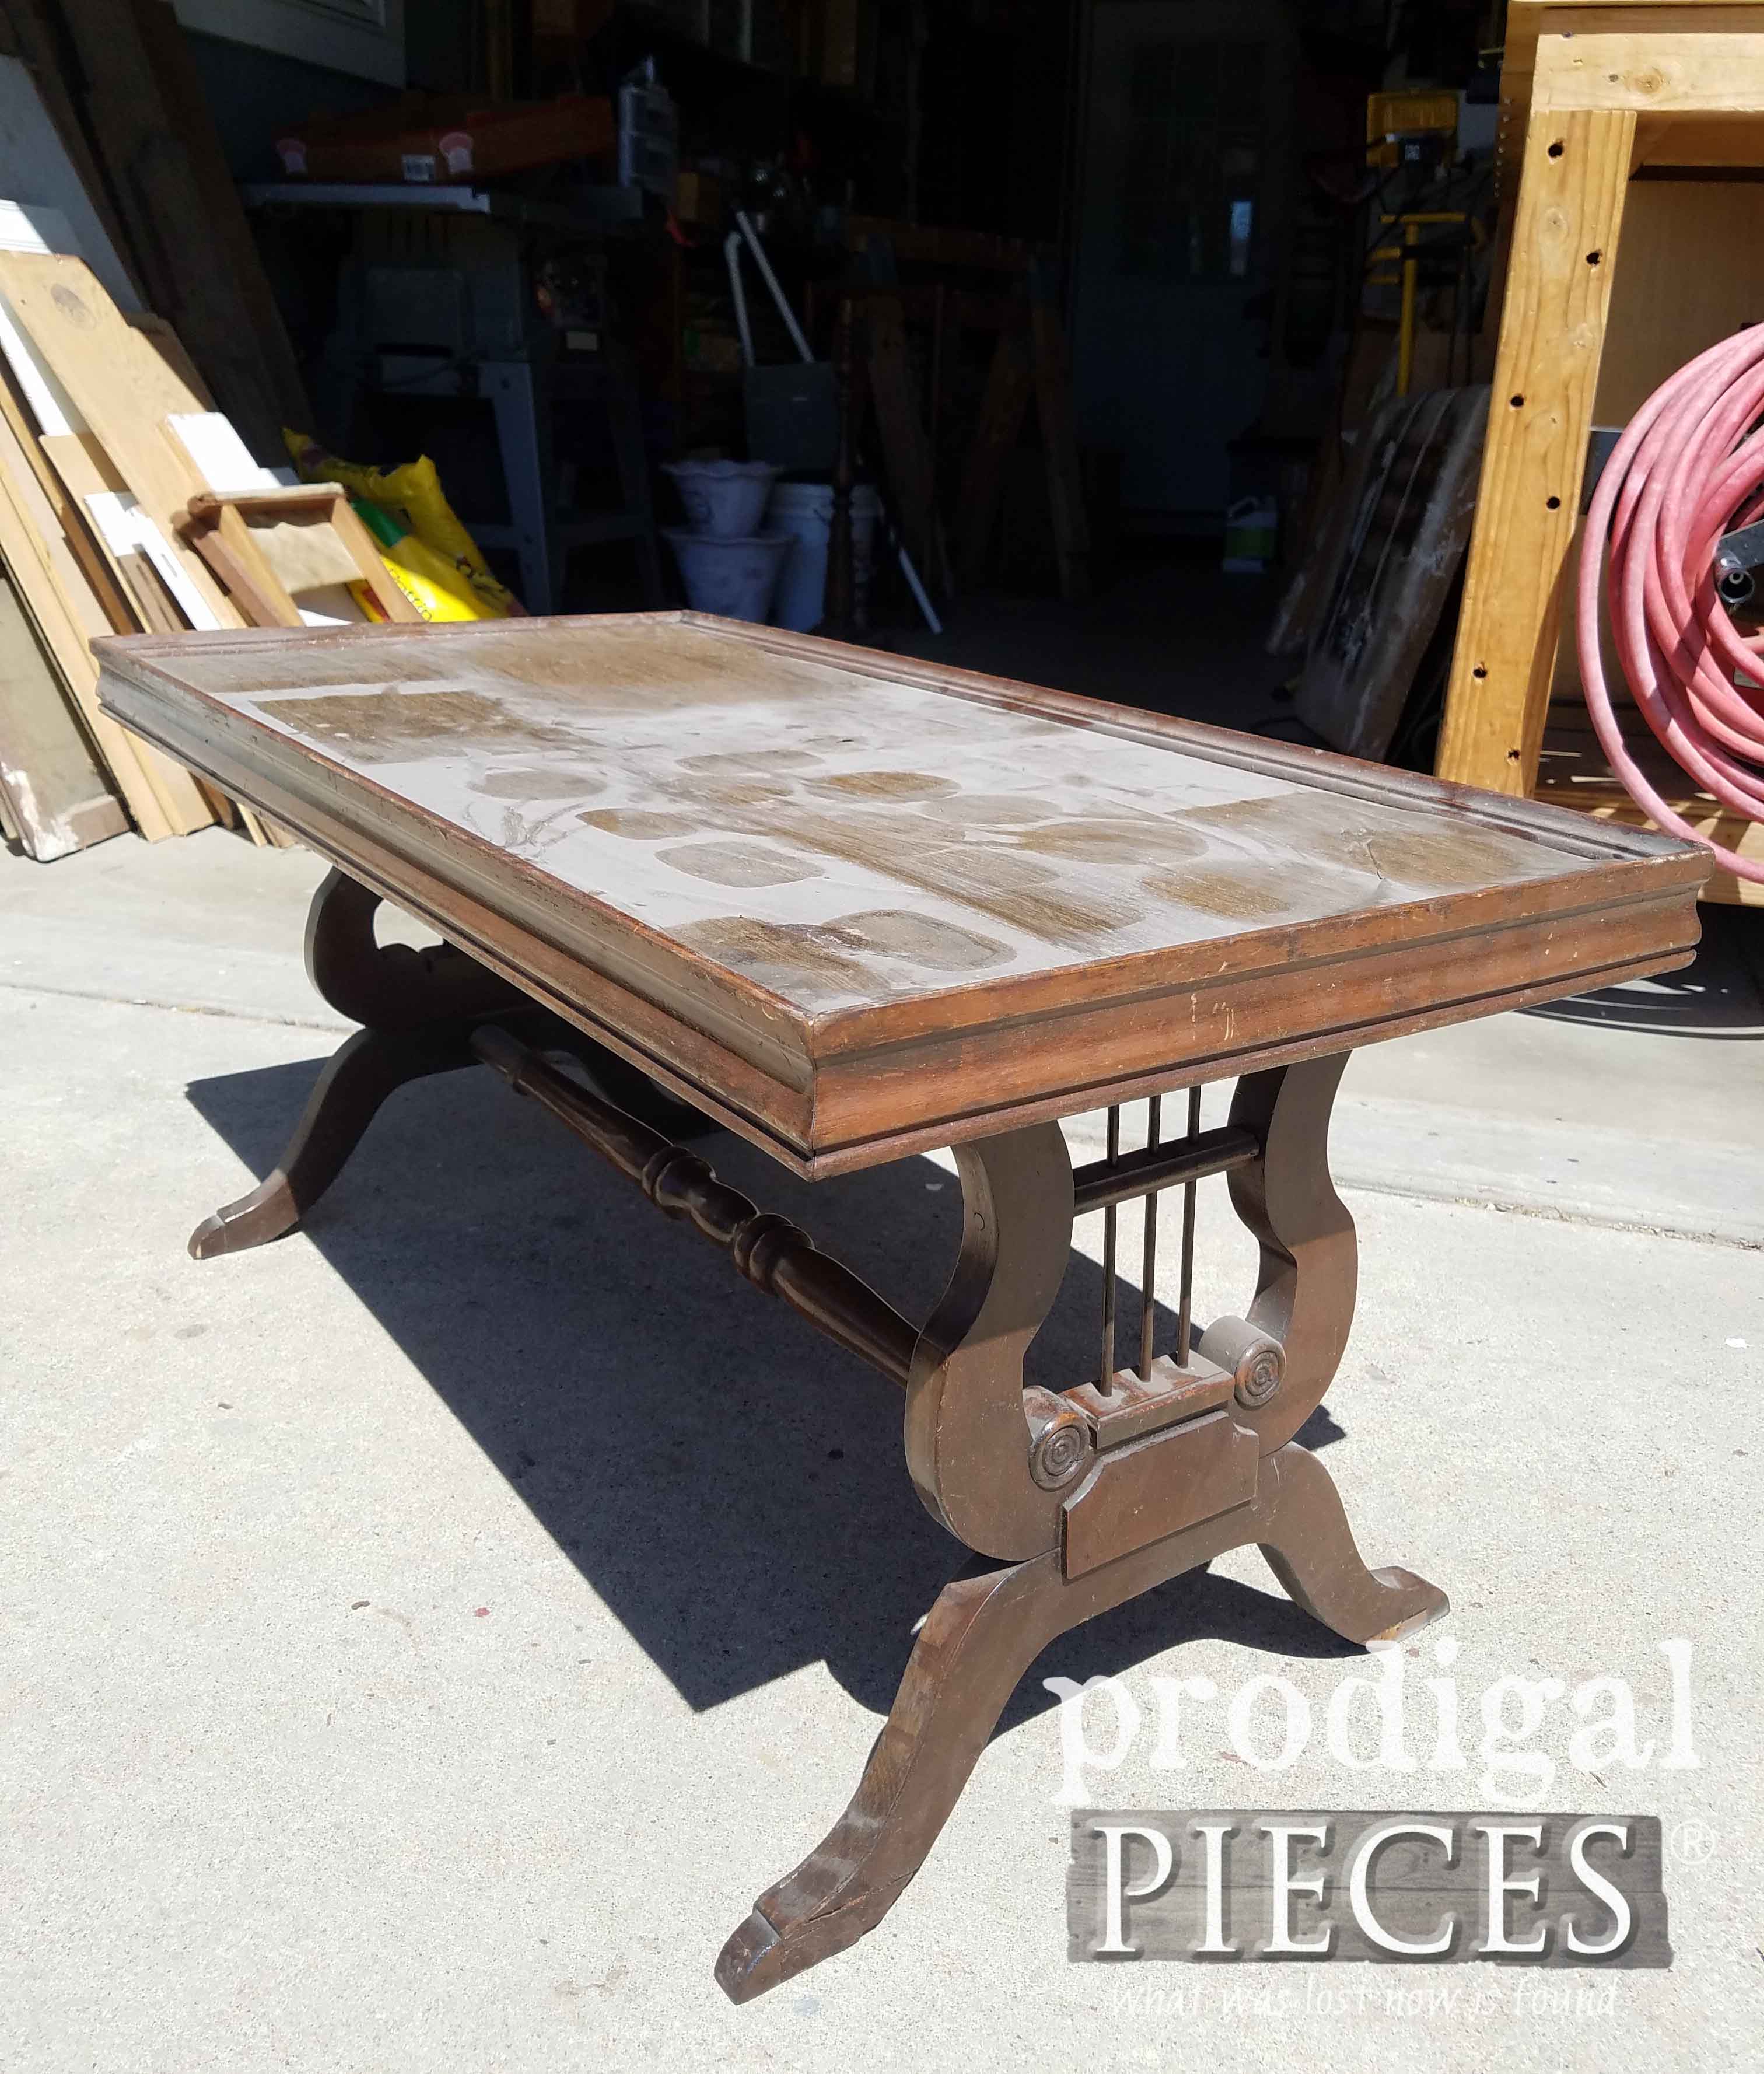 Antique Lyre Coffee Table Before Makeover by Prodigal Pieces | prodigalpieces.com